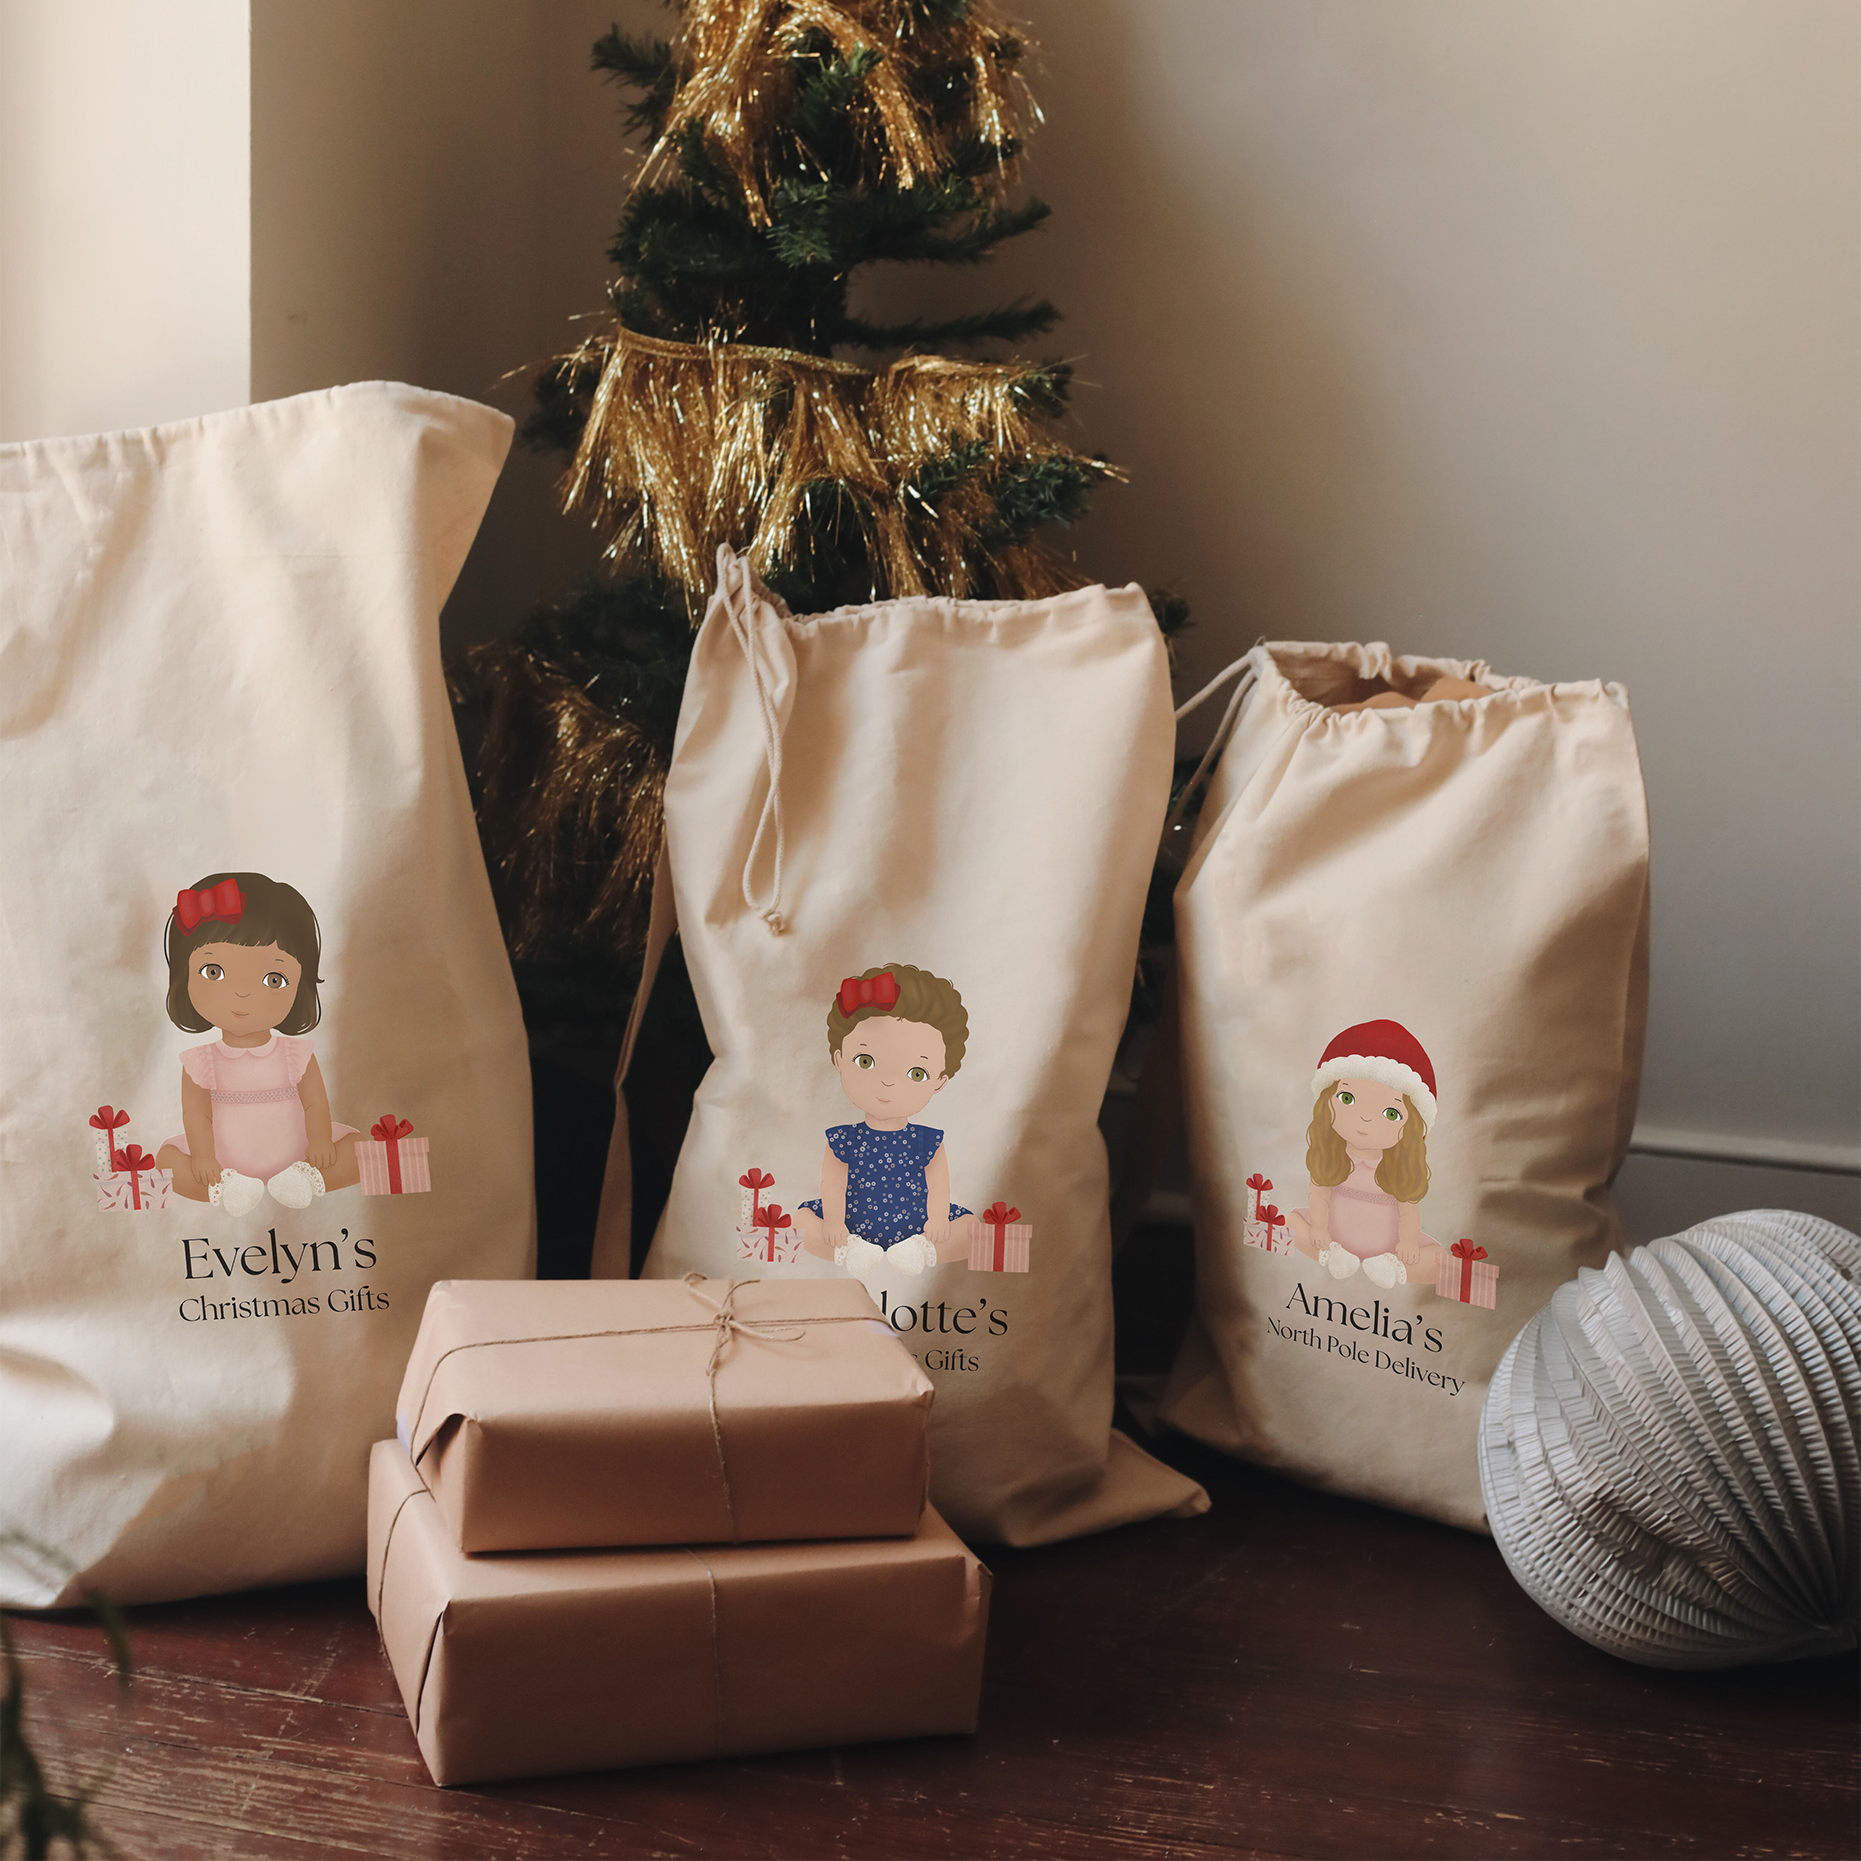 Large Personalized Santa Sacks With a Custom Illustration of Your Child